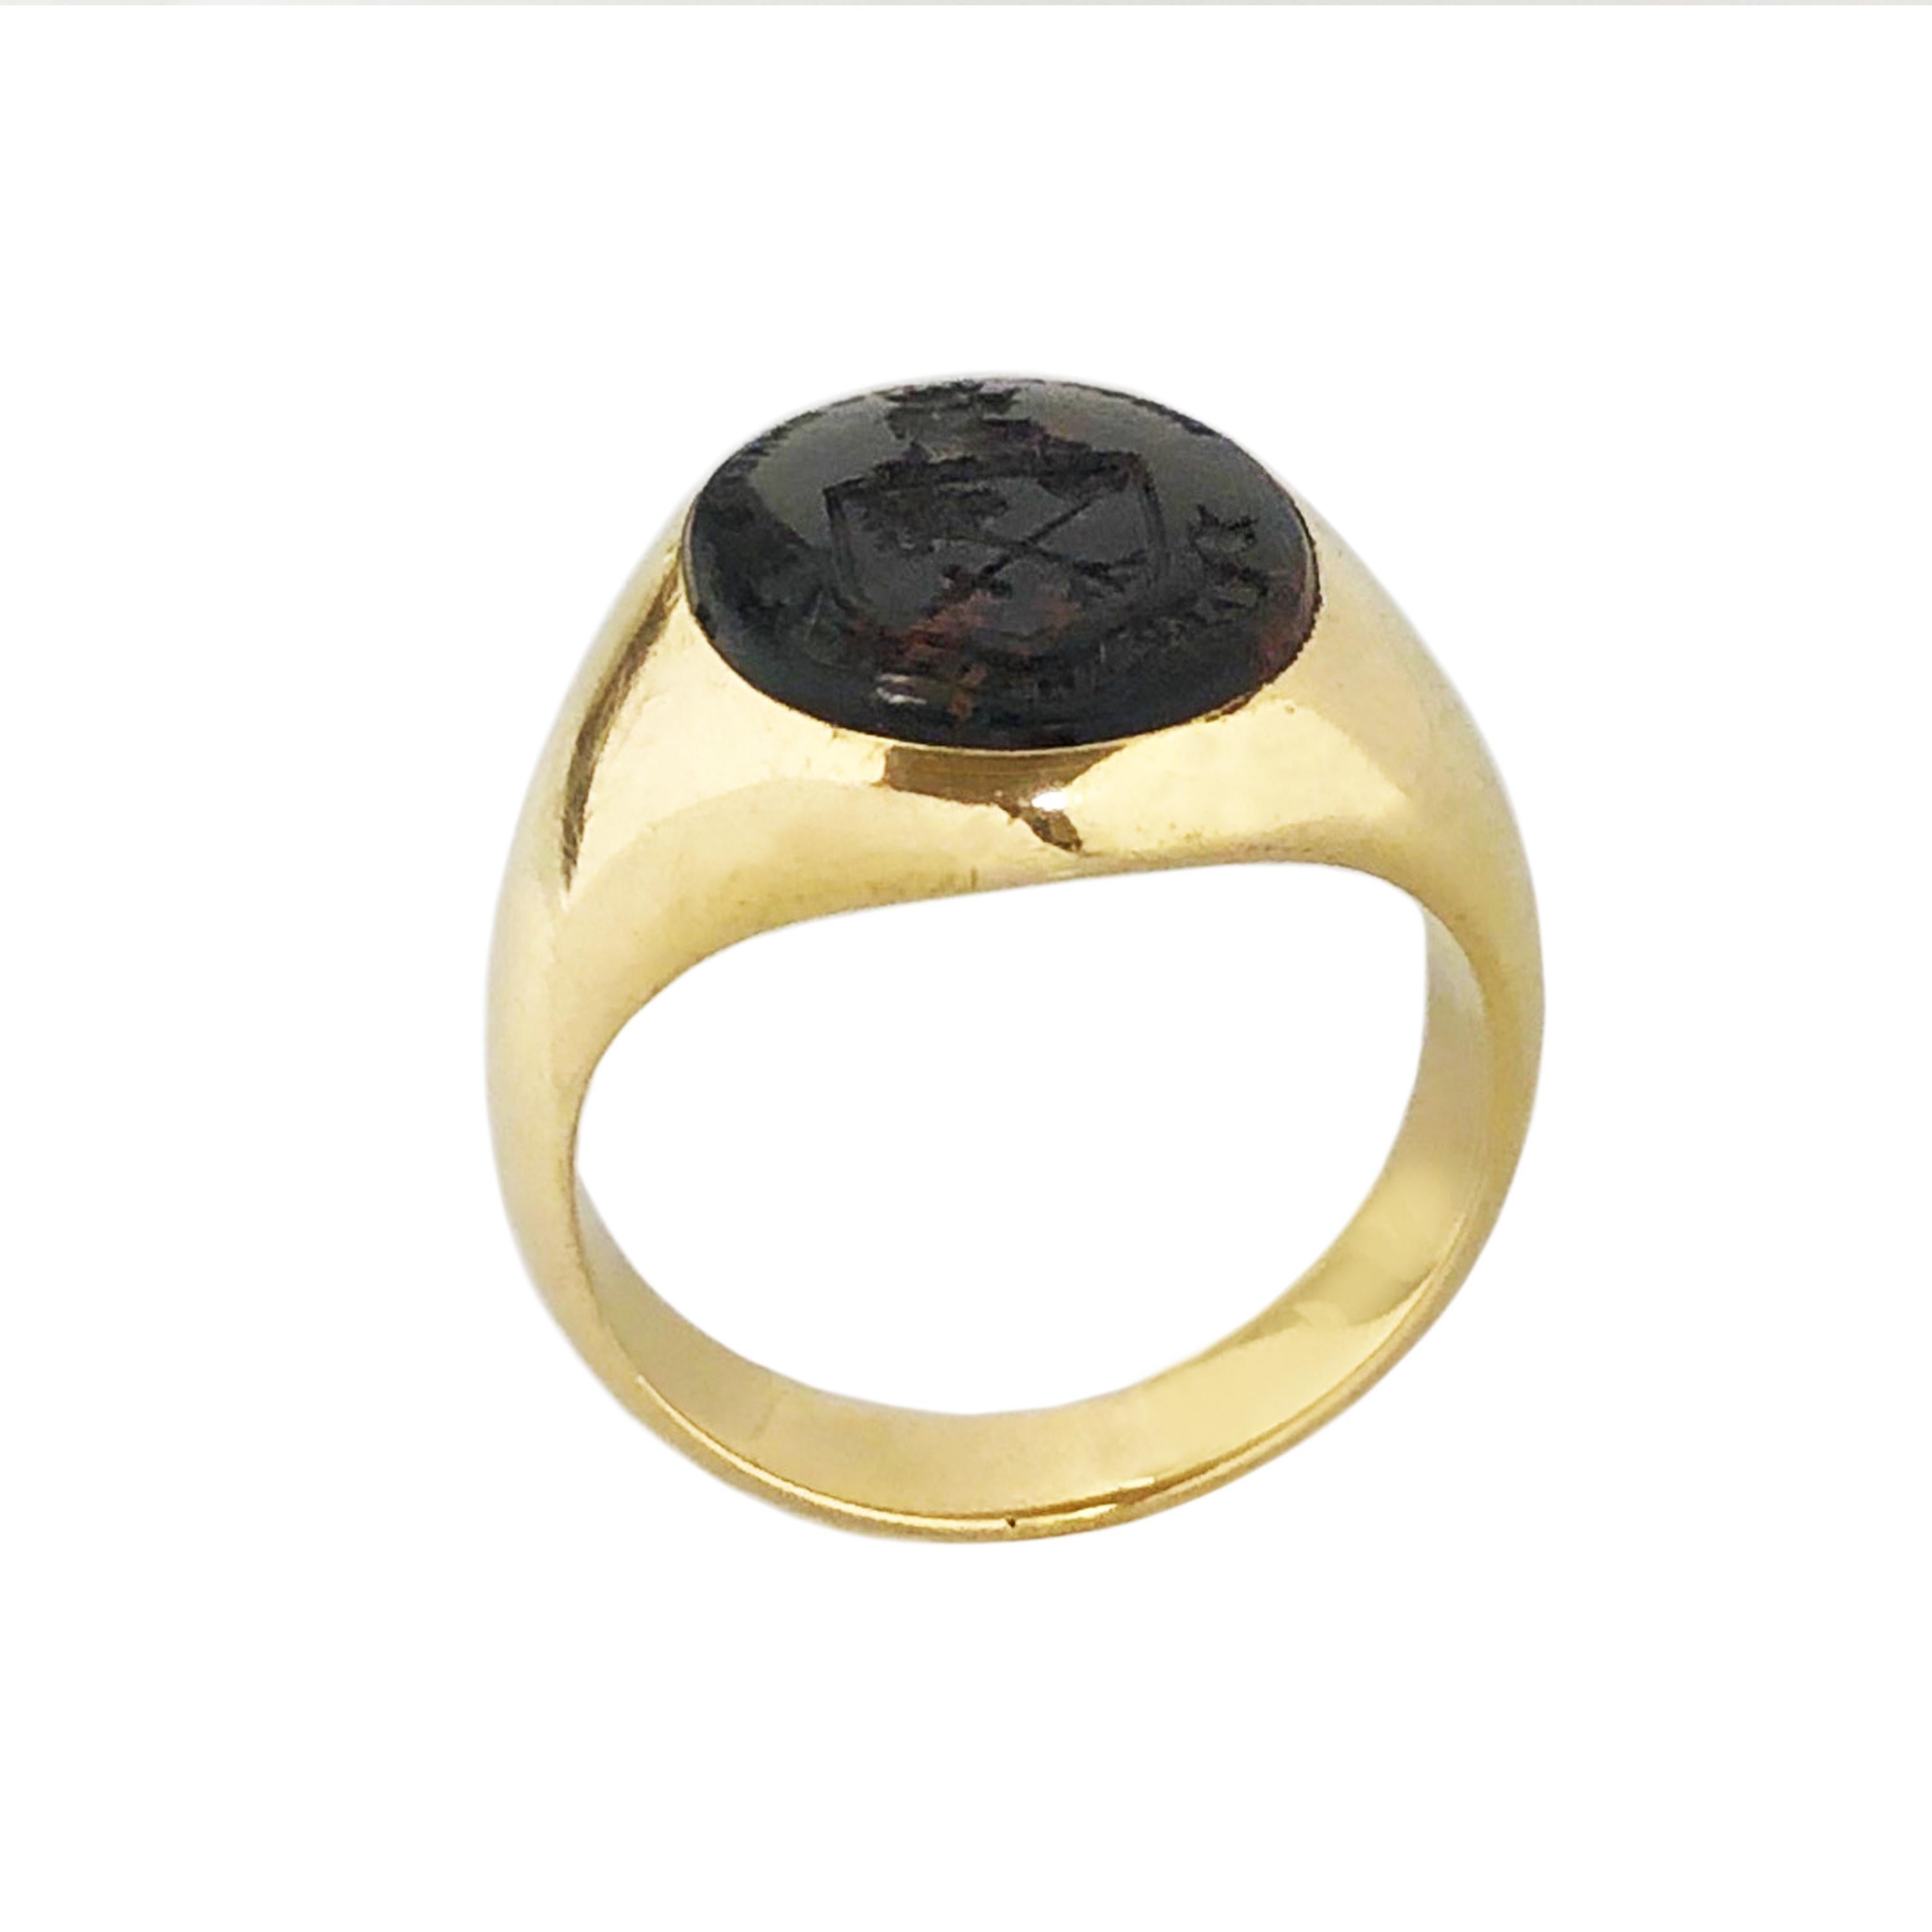 Edwardian Antique Bailey Banks & Biddle Gold and Blood Stone Intaglio Signet Ring